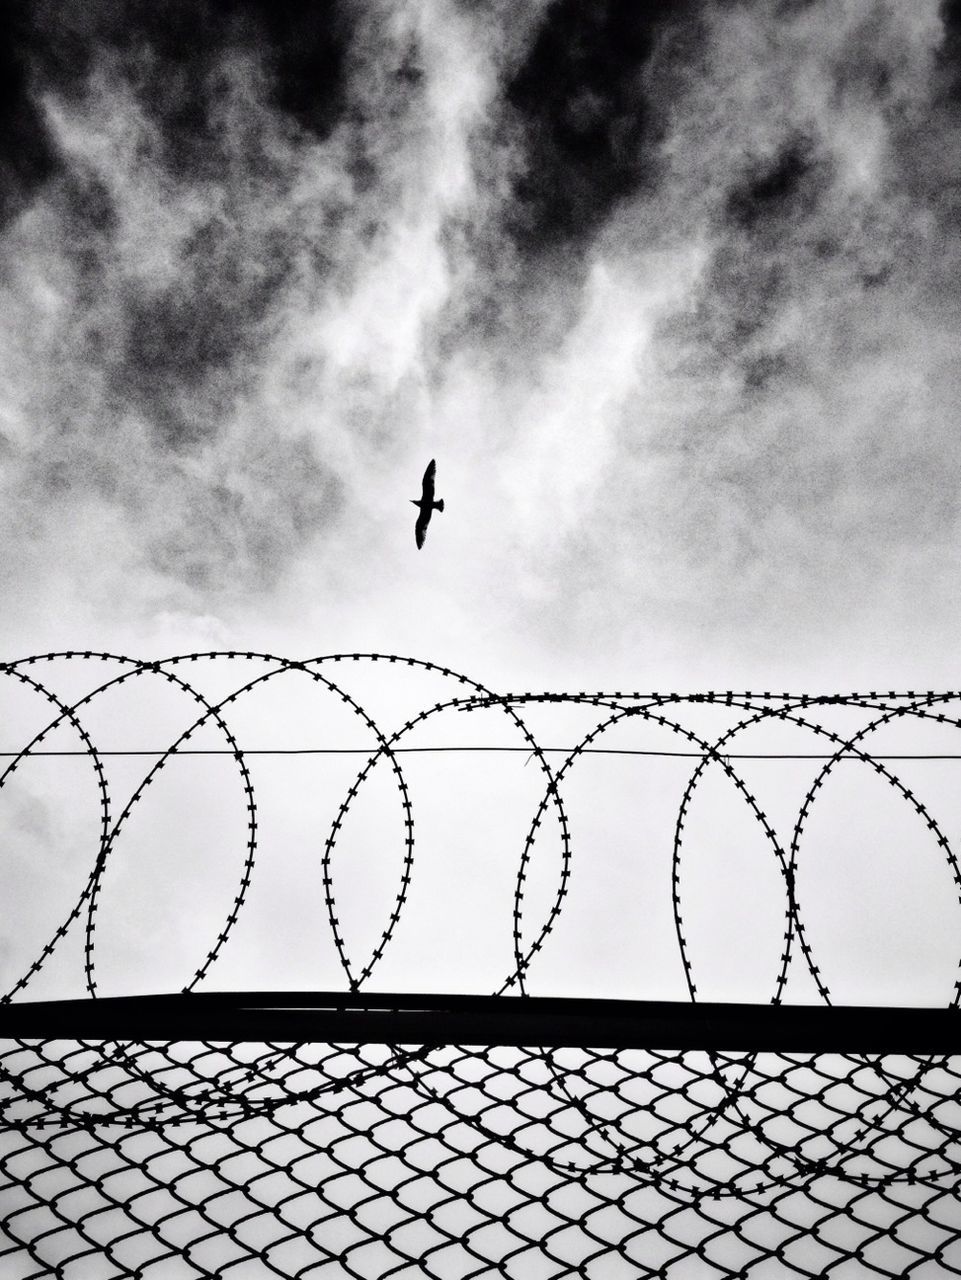 bird, animal themes, animals in the wild, sky, wildlife, perching, fence, metal, low angle view, flying, protection, safety, one animal, cloud - sky, chainlink fence, built structure, outdoors, no people, railing